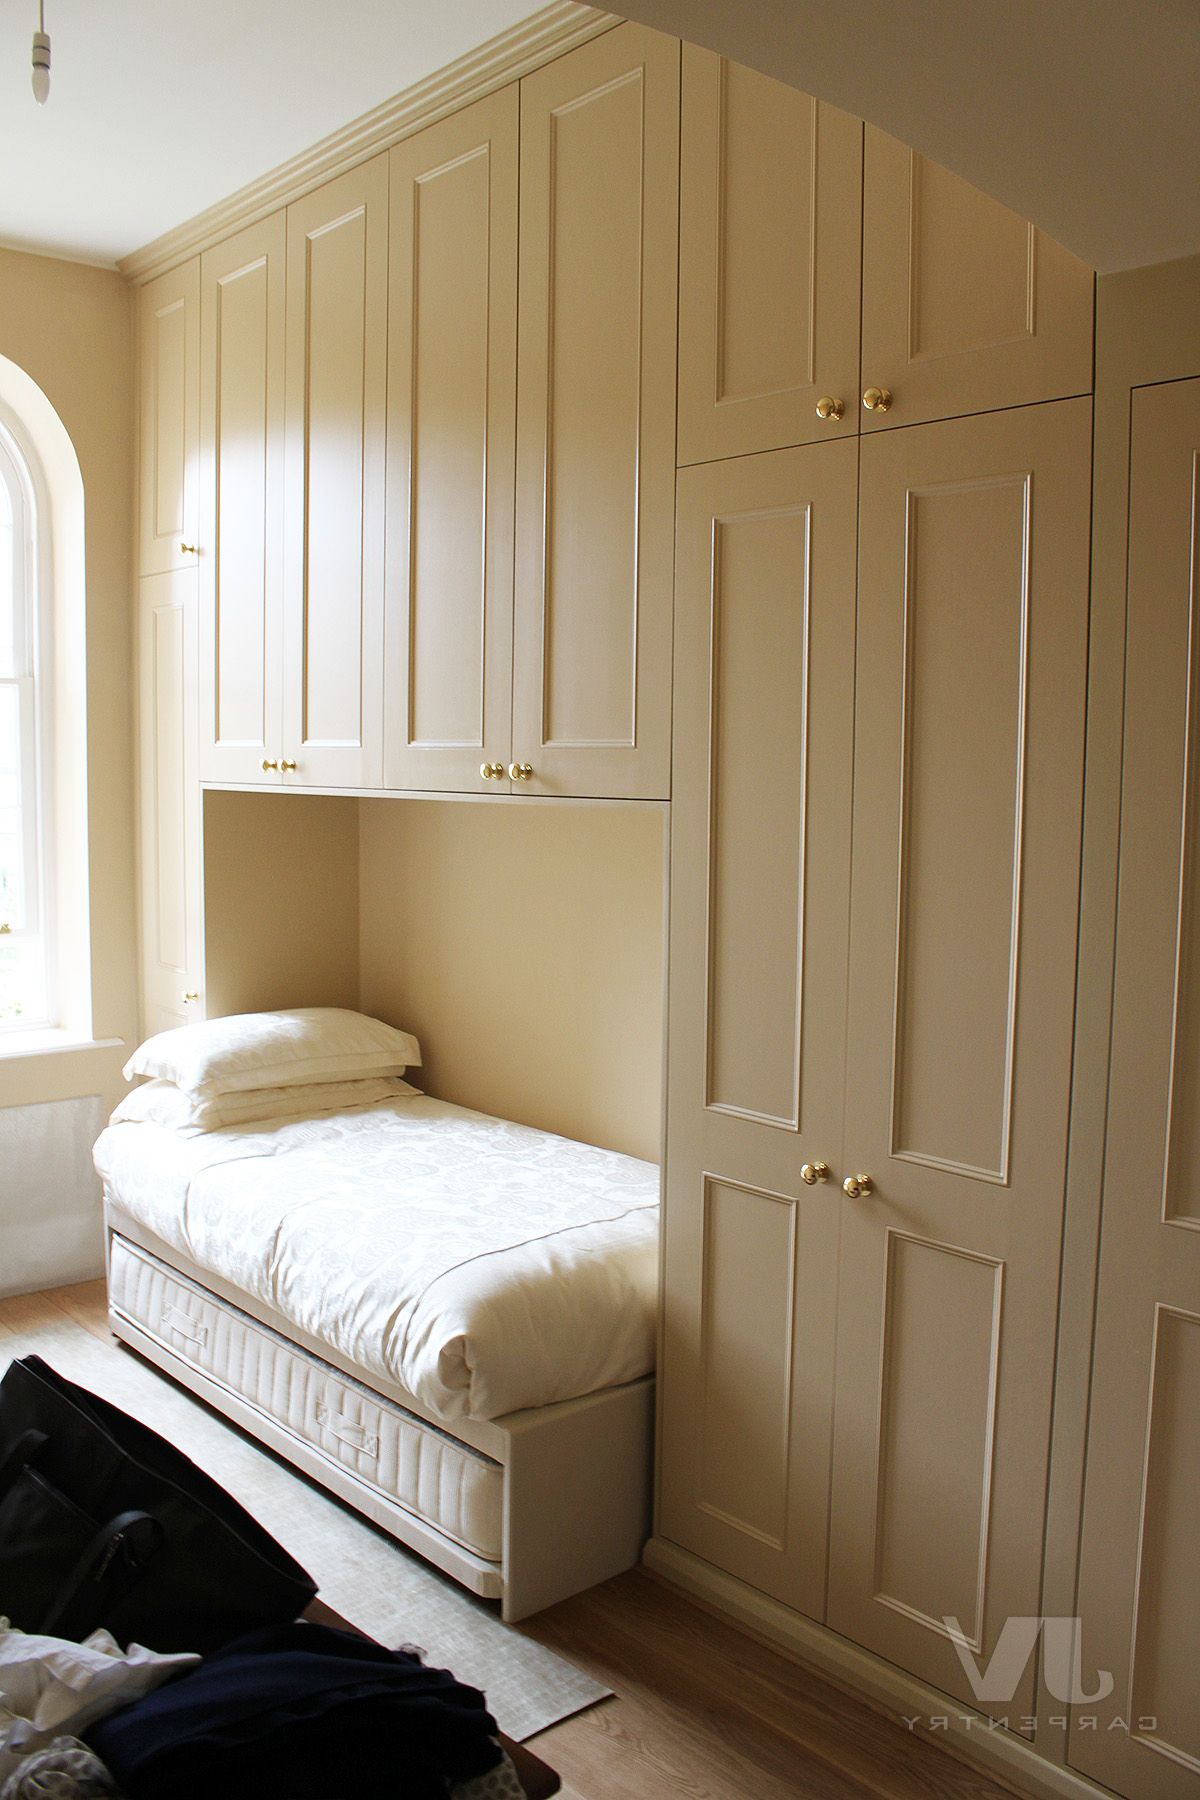 12 Fitted Wardrobes Over Bed Ideas For Your Bedroom | Jv Carpentry With Regard To Overbed Wardrobes (View 17 of 20)